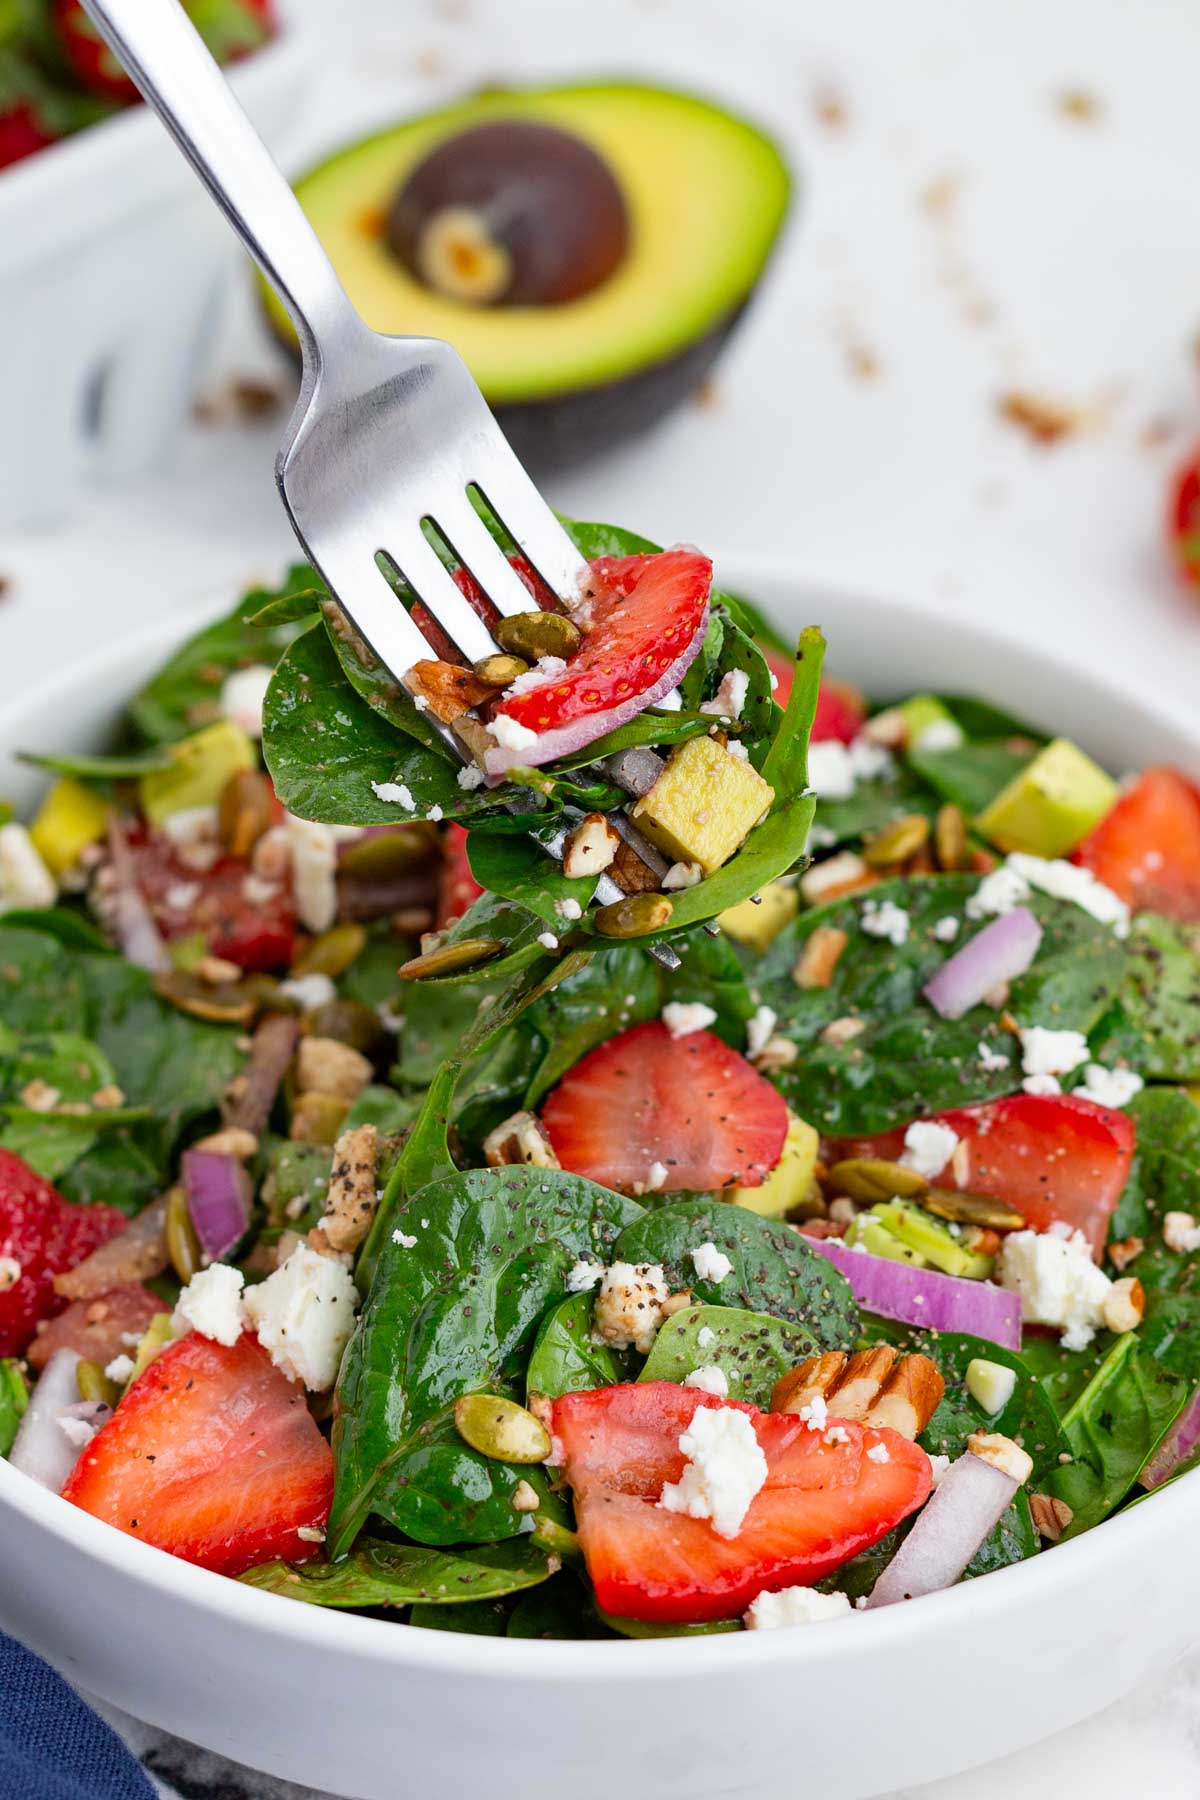 A fork scoops out a bite of this salad with spinach and strawberries.